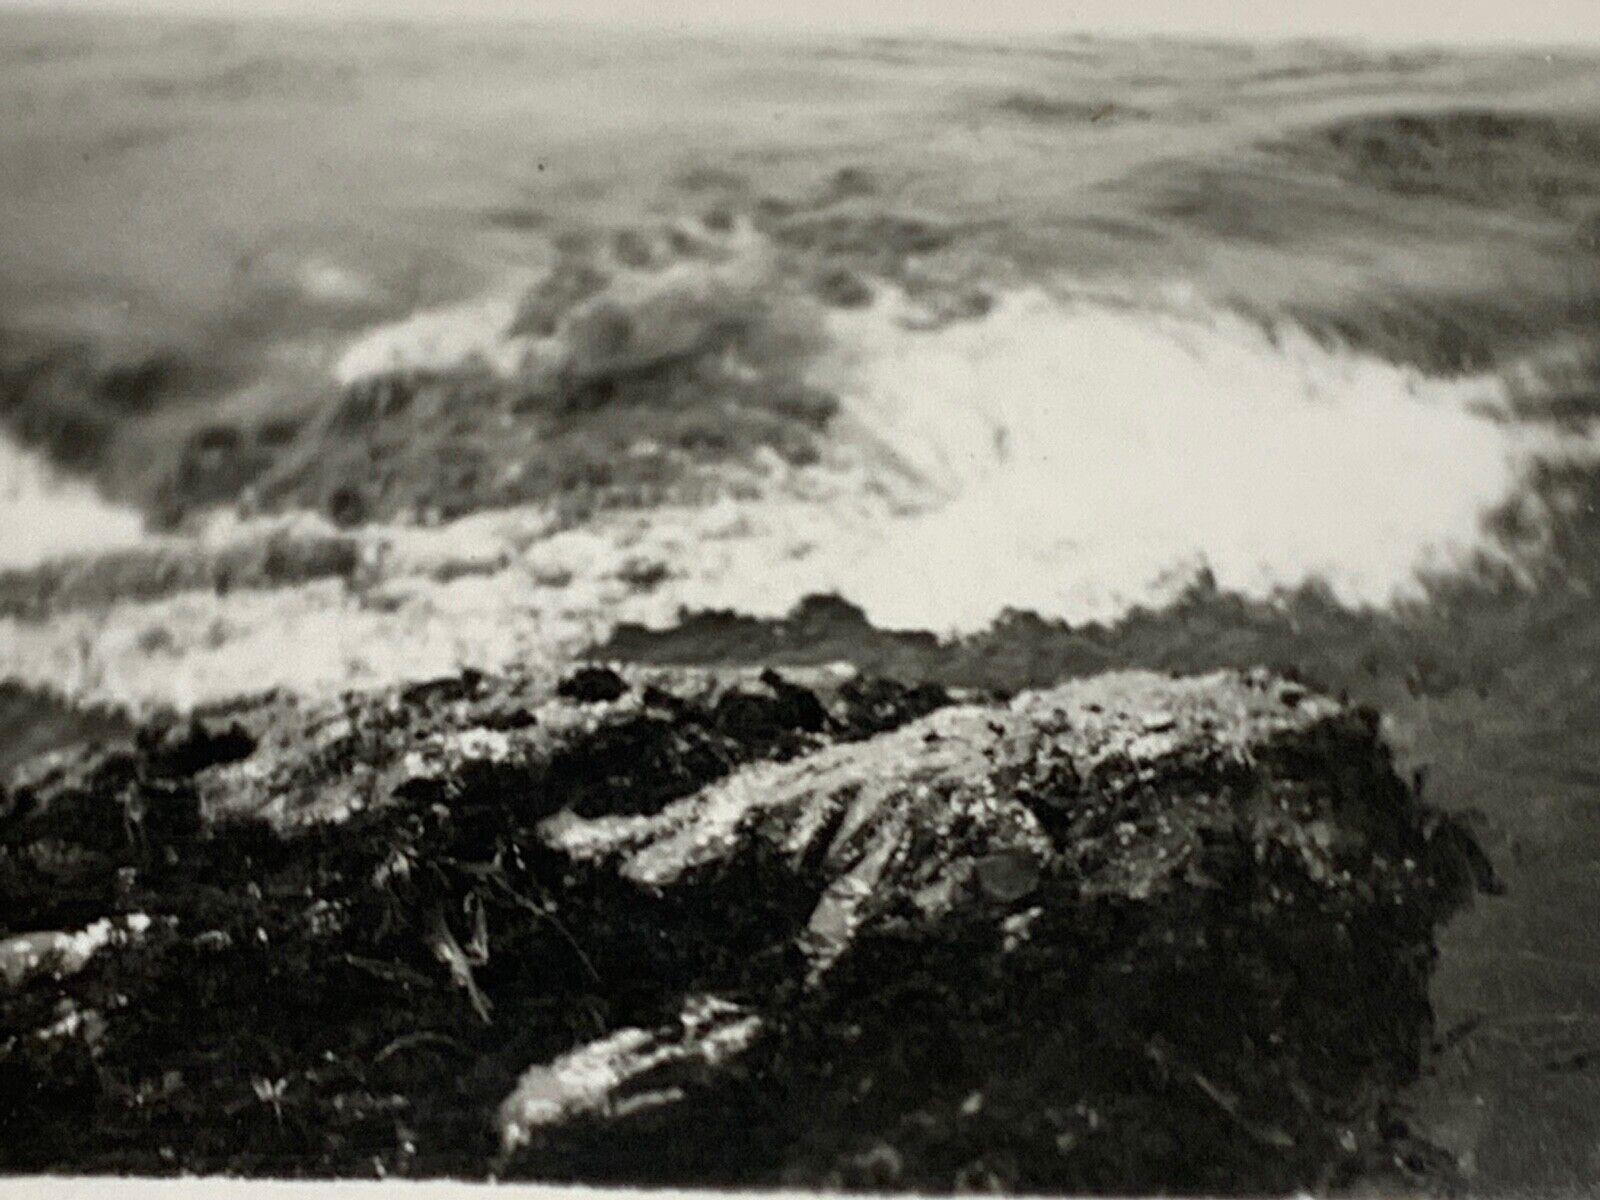 (AaF) FOUND PHOTO Photograph Snapshot Abstract Ocean Beach Close Up Army 